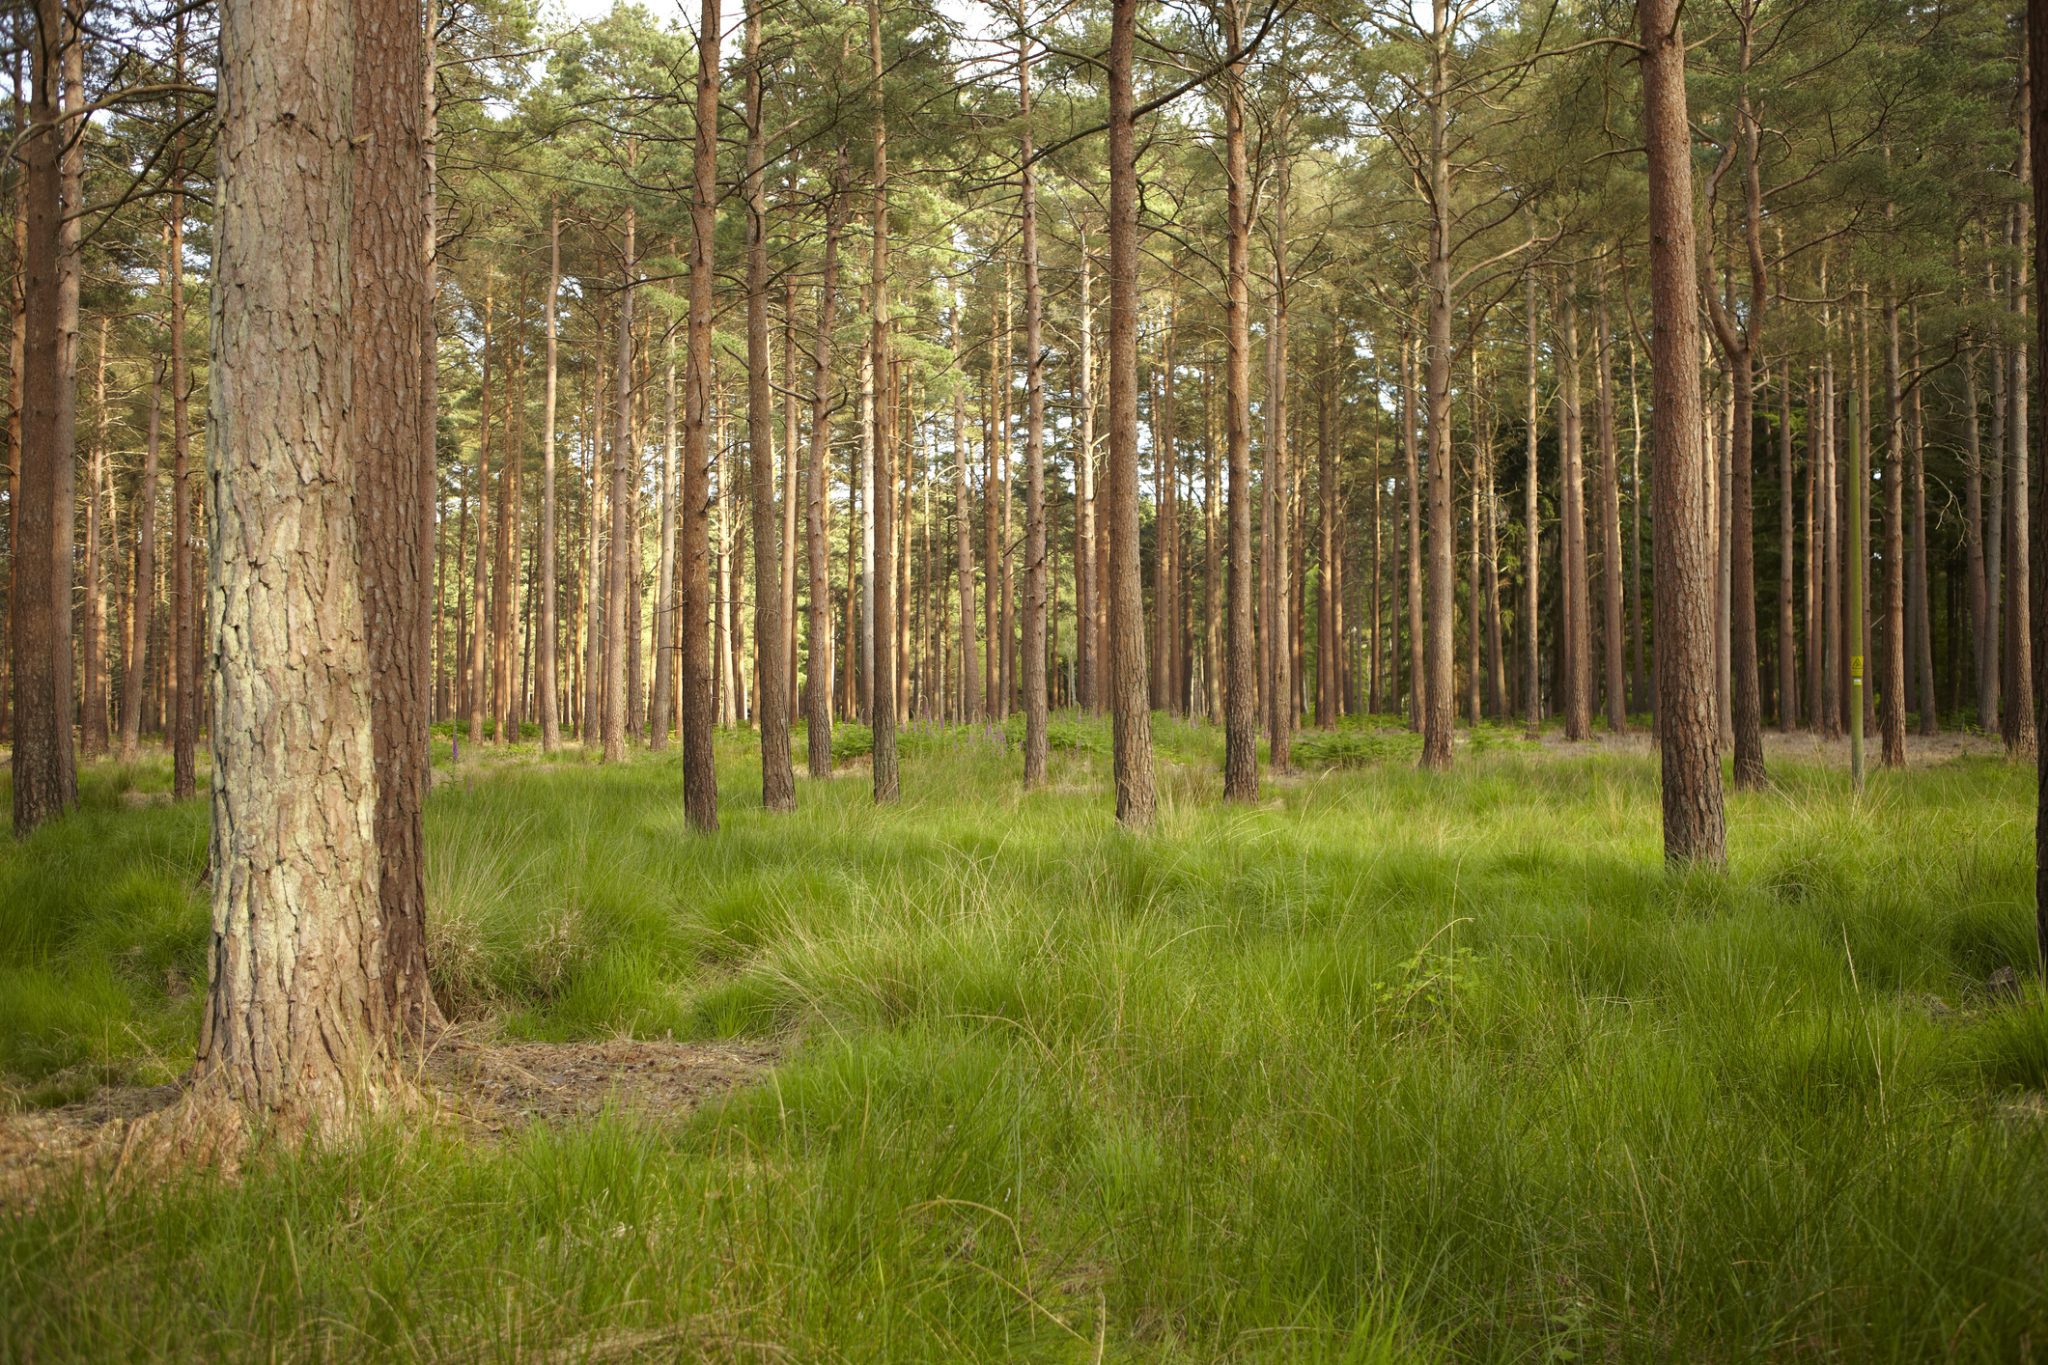 A stand of pine trees in a forest